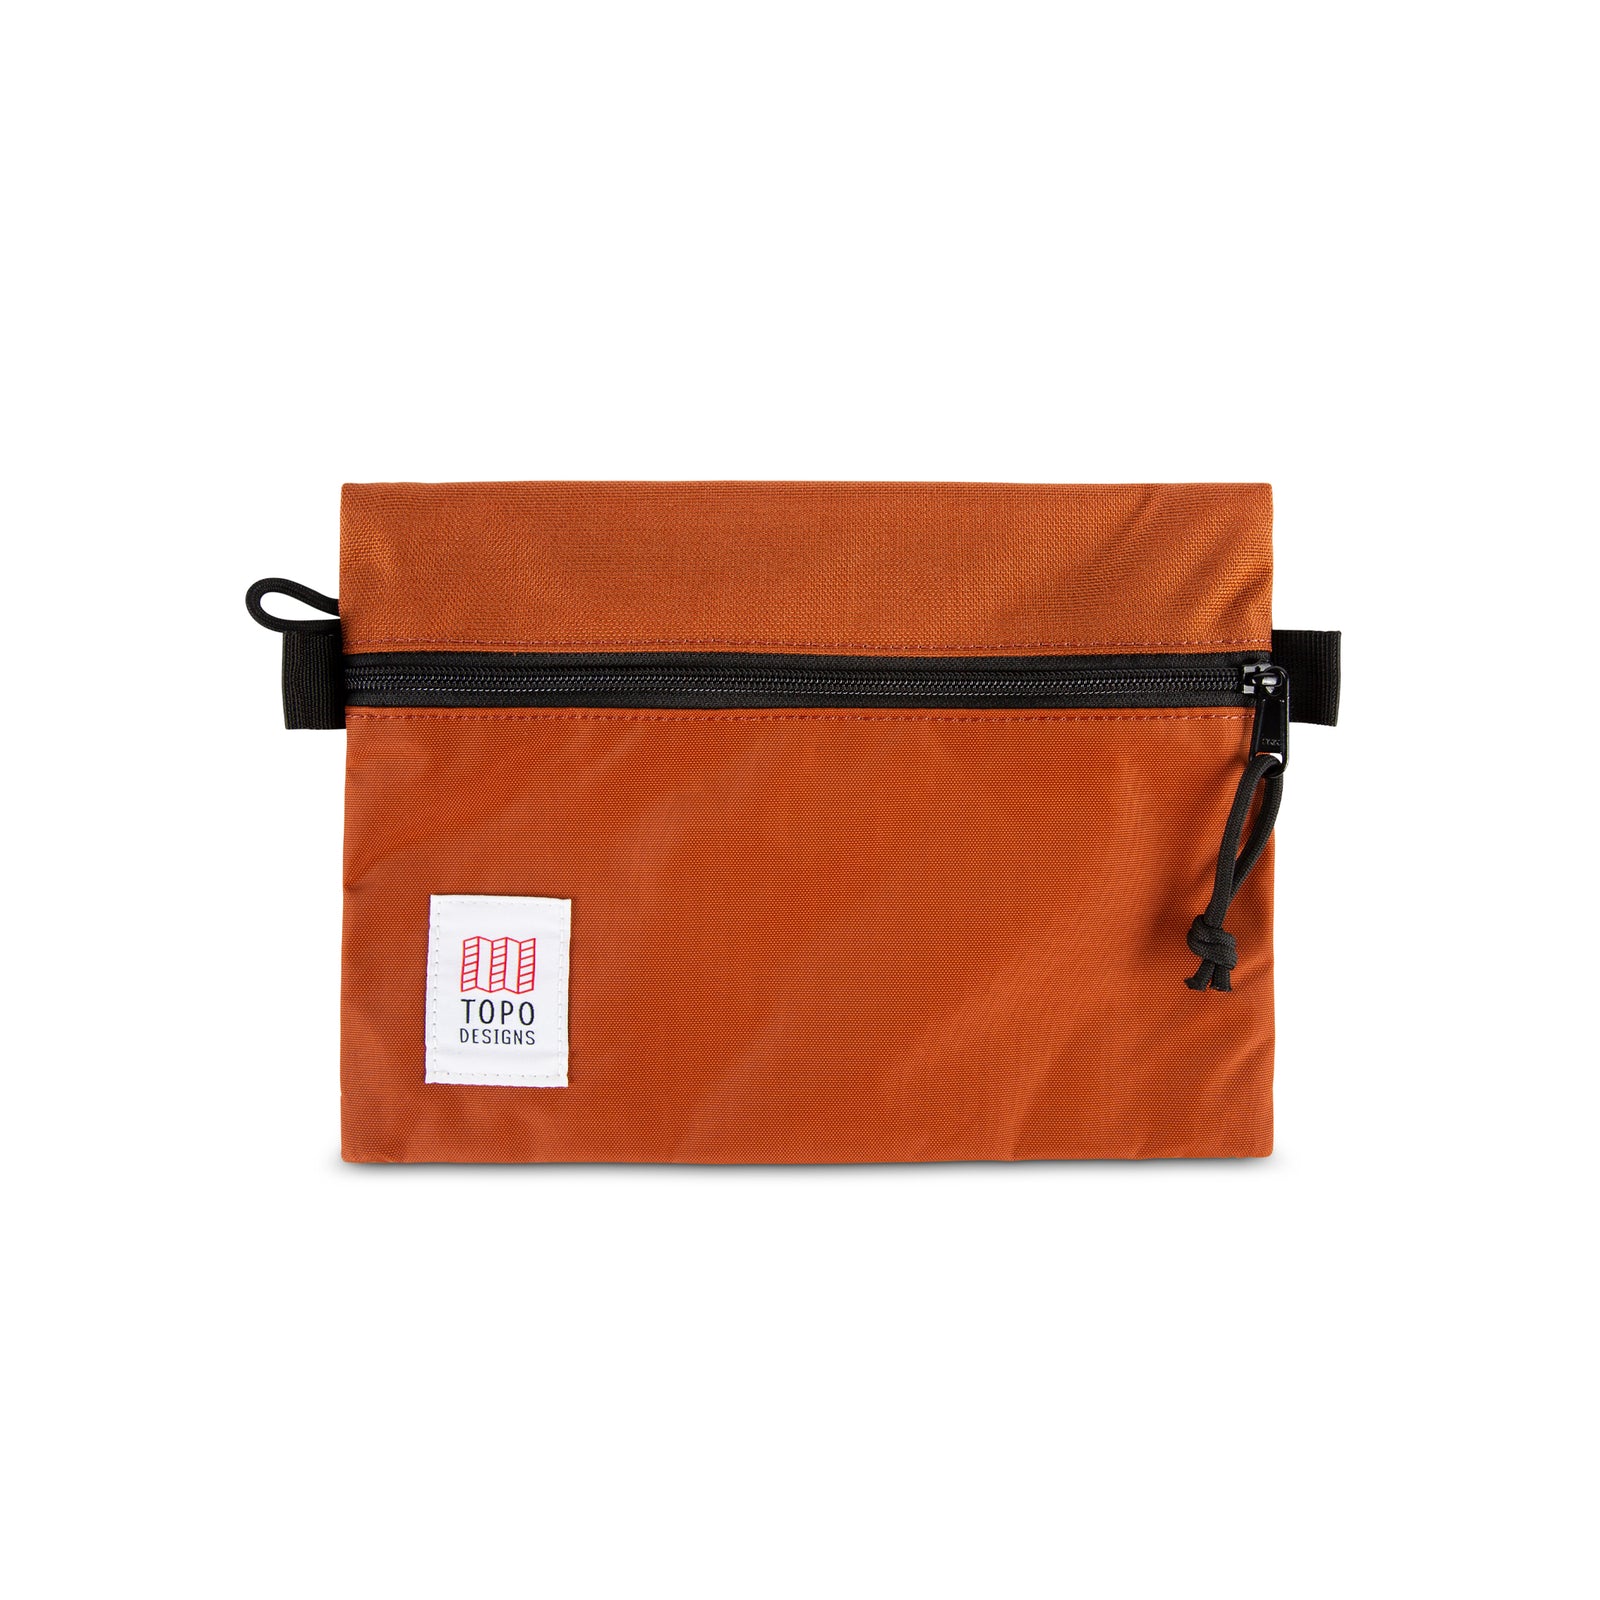 Topo Designs Accessory Bags in "Medium" "Clay - Recycled" orange.